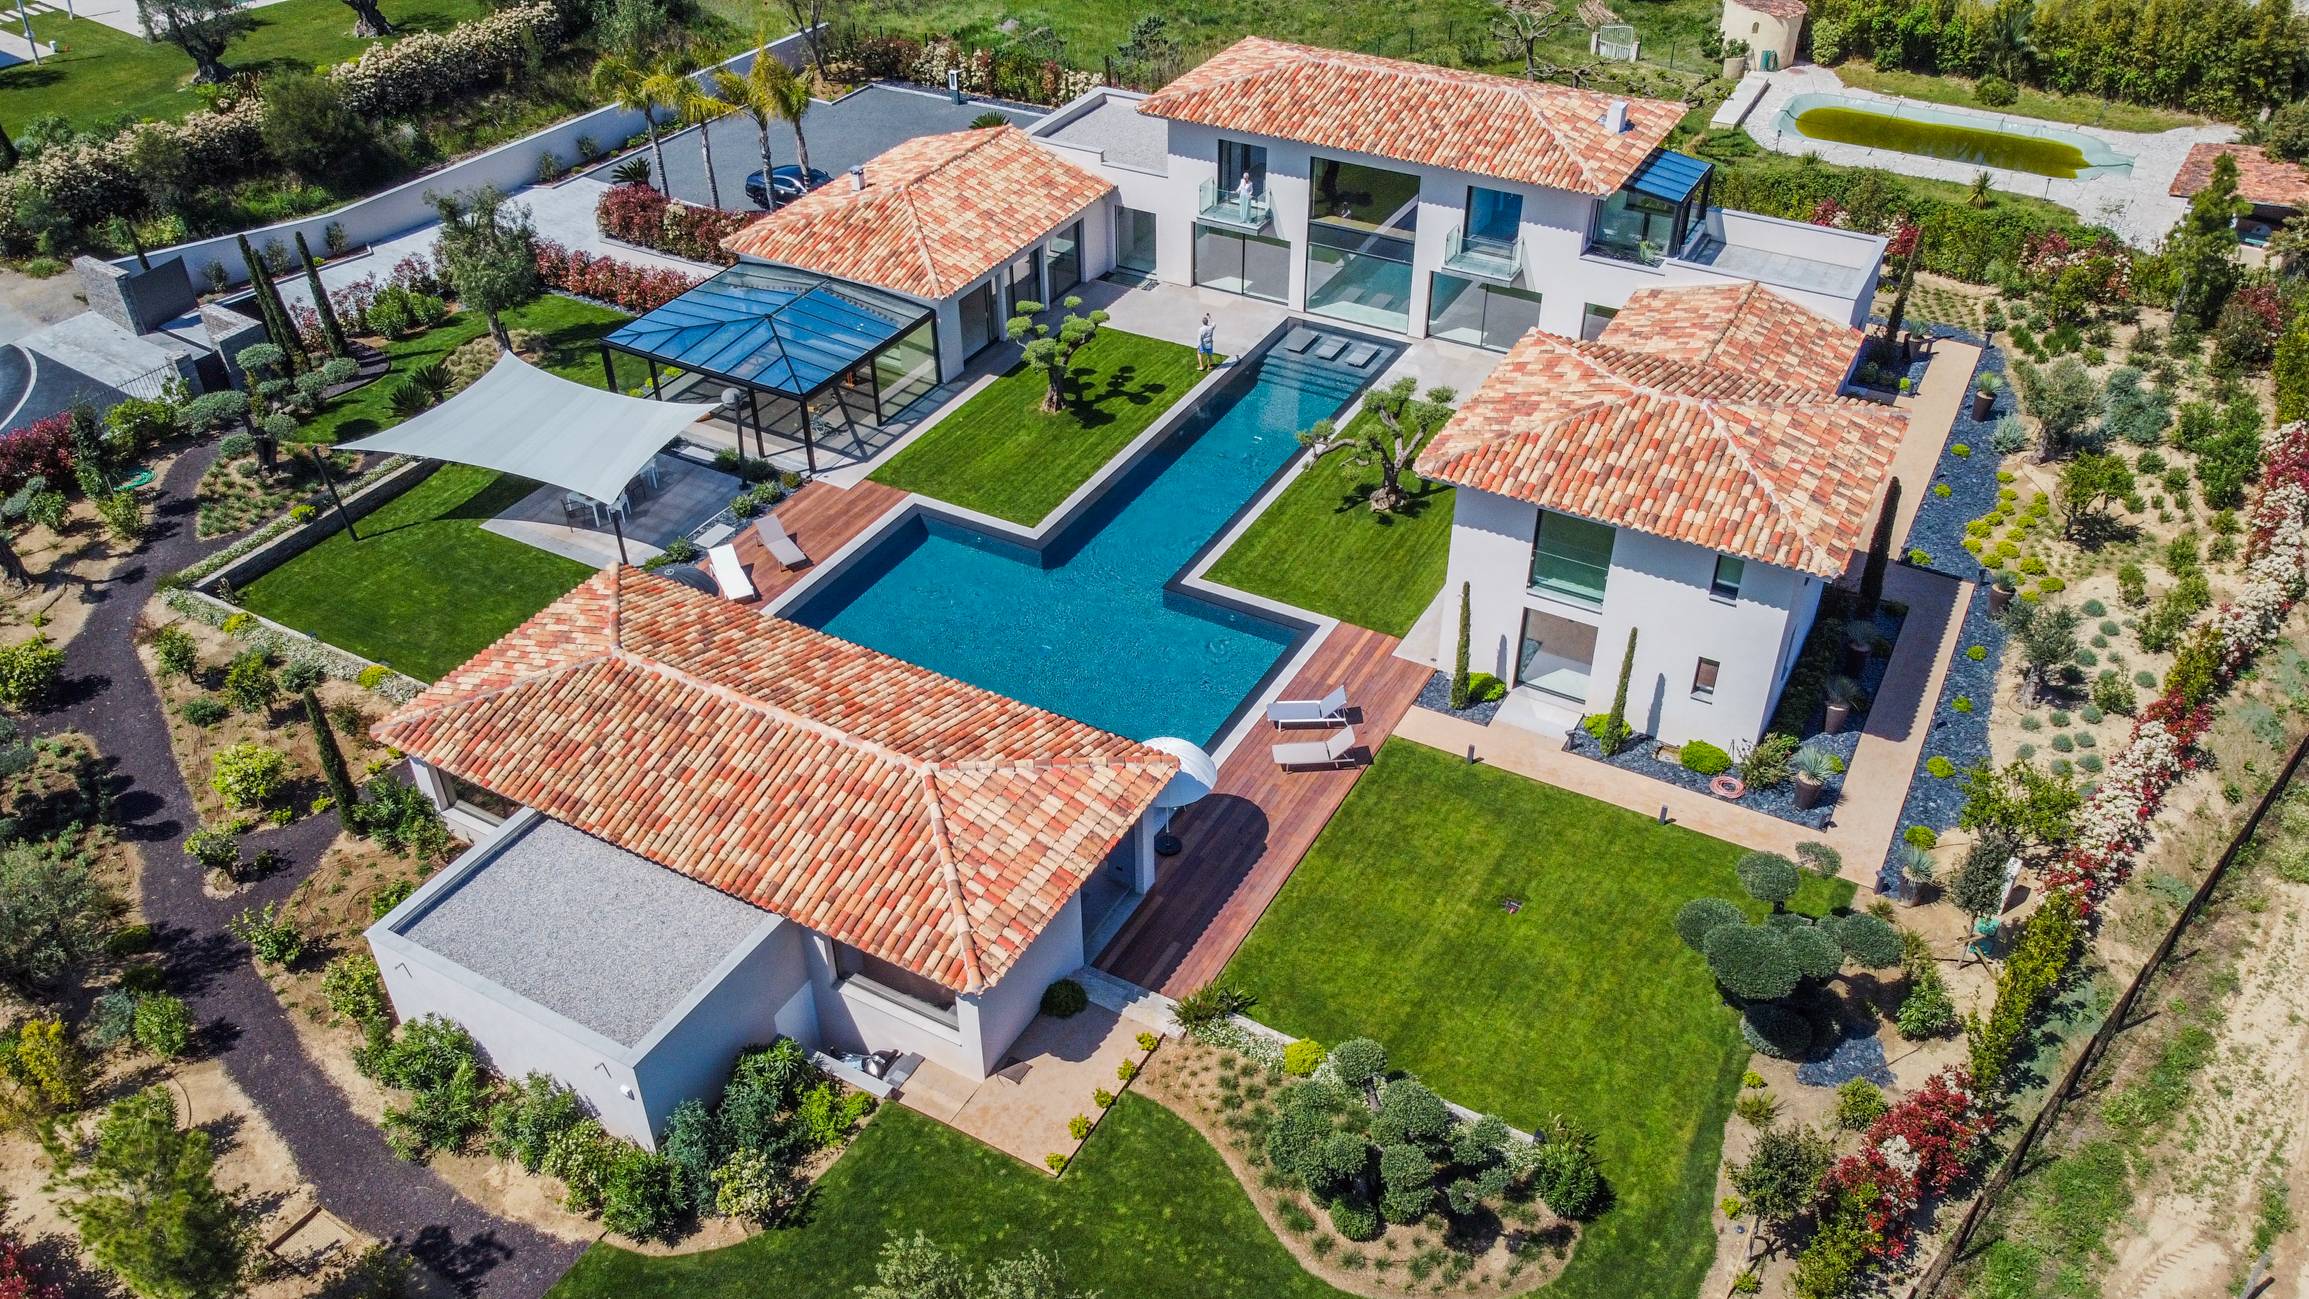 Sublime new property located near the beaches and the center of Saint Tropez .